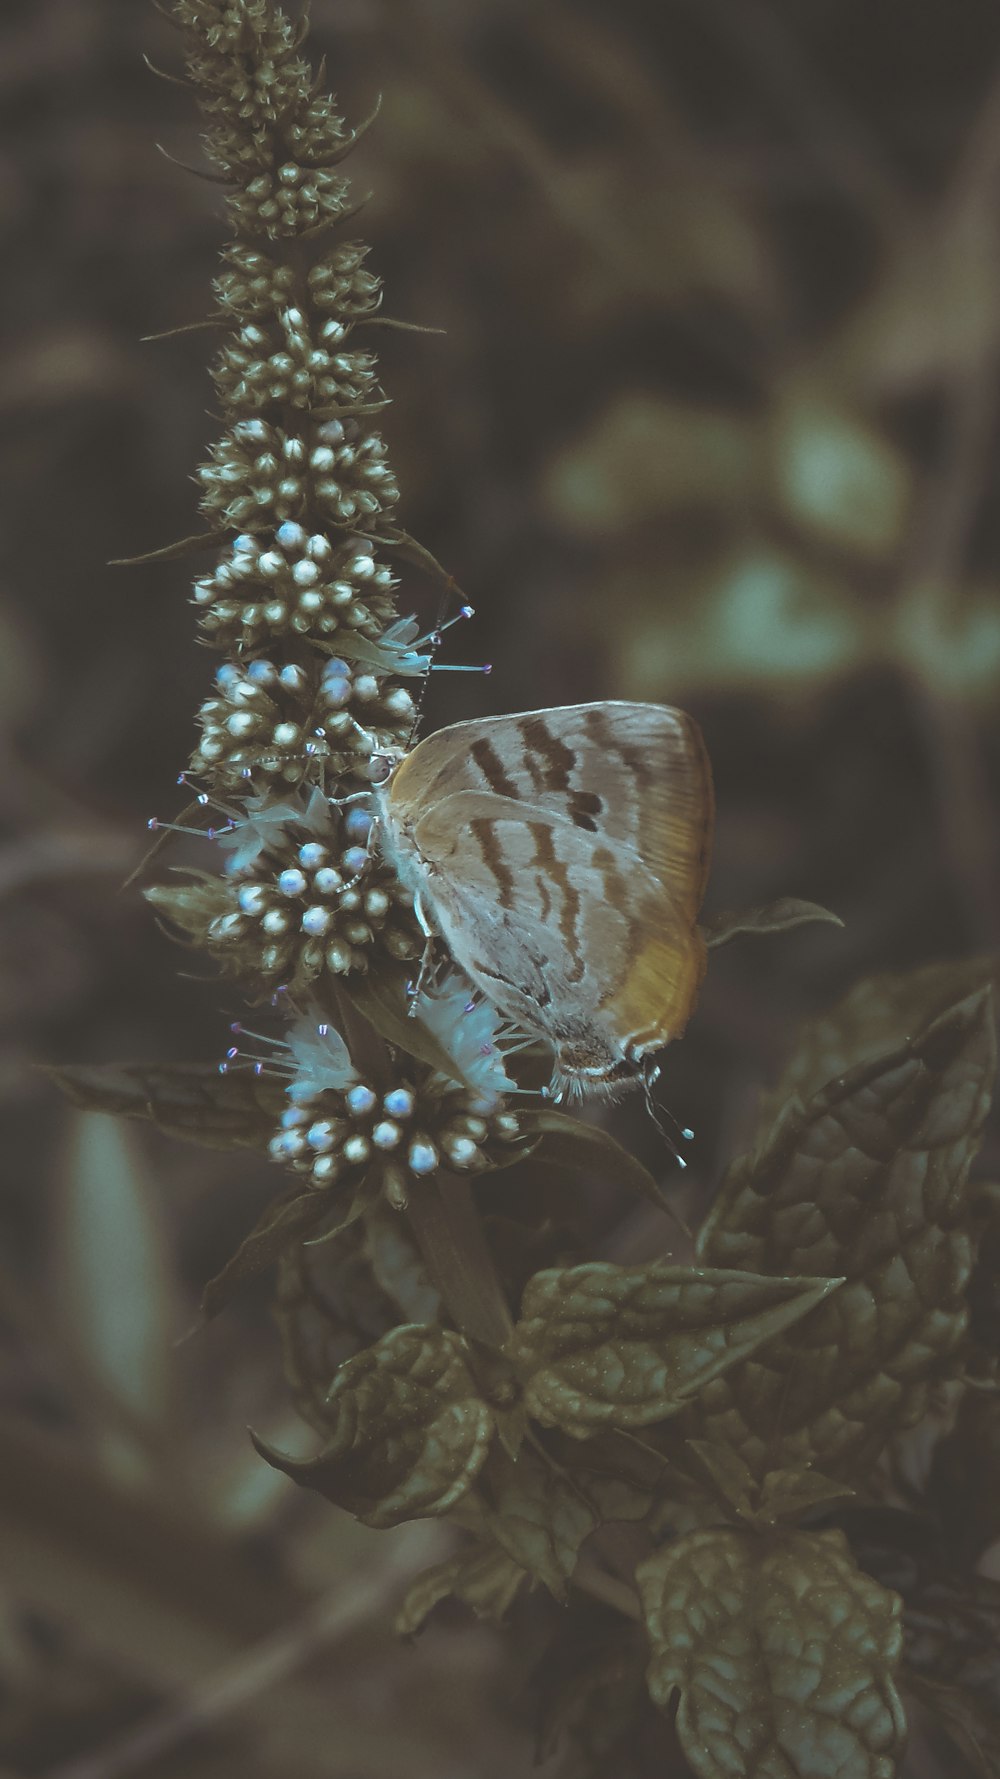 brown and white butterfly perched on blue flower in close up photography during daytime